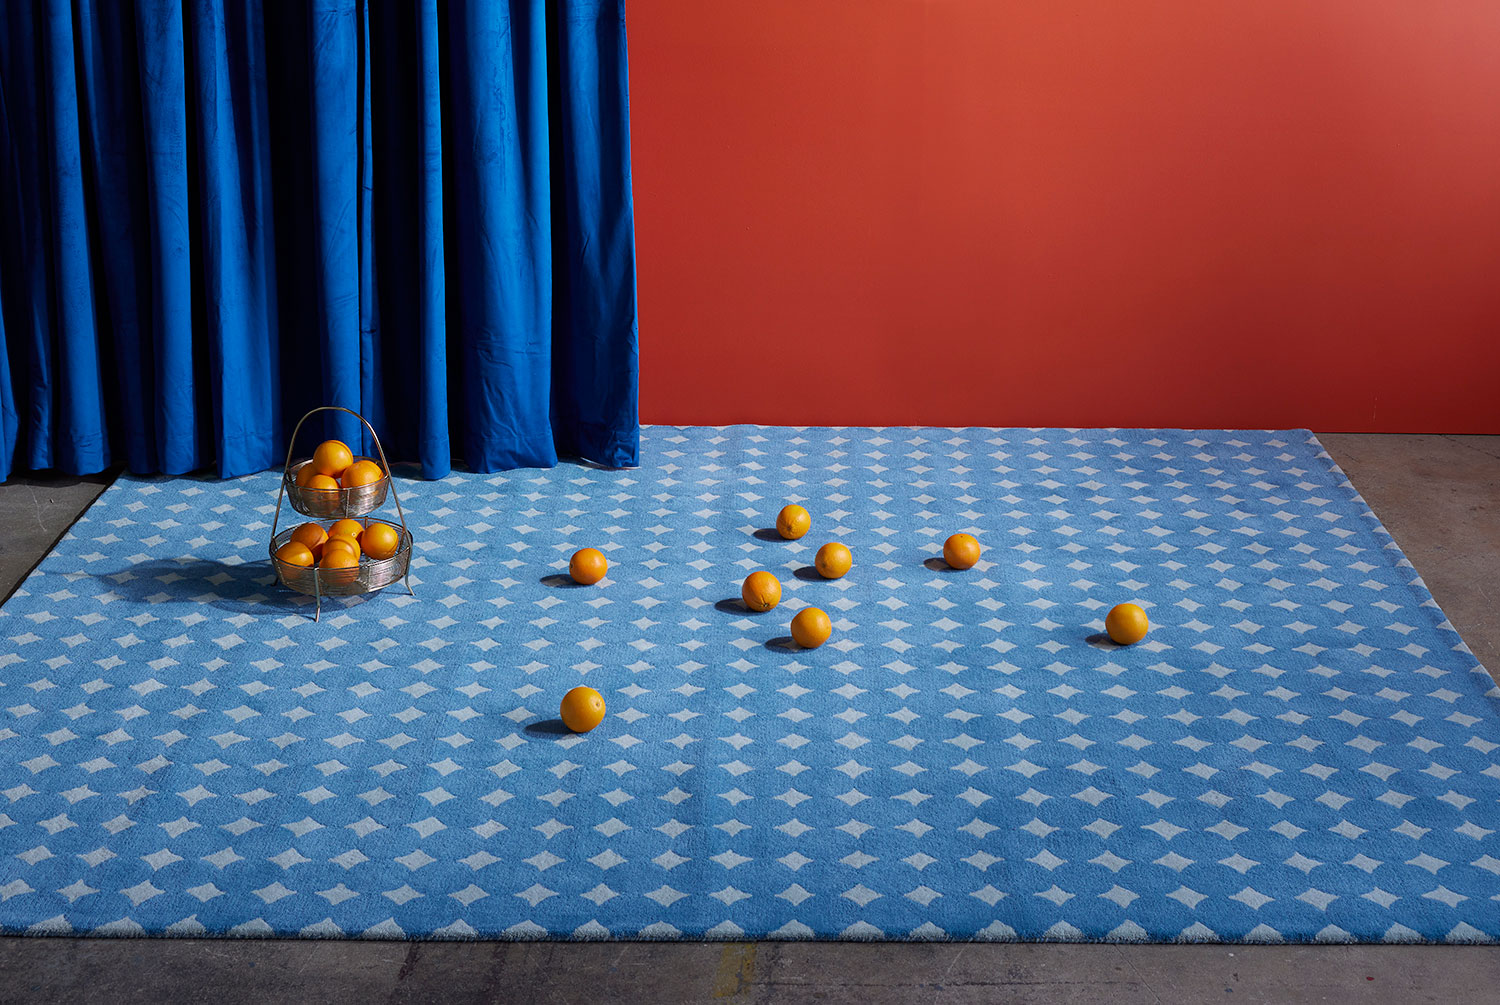 A blue area rug called Bongo Pool with oranges on it.